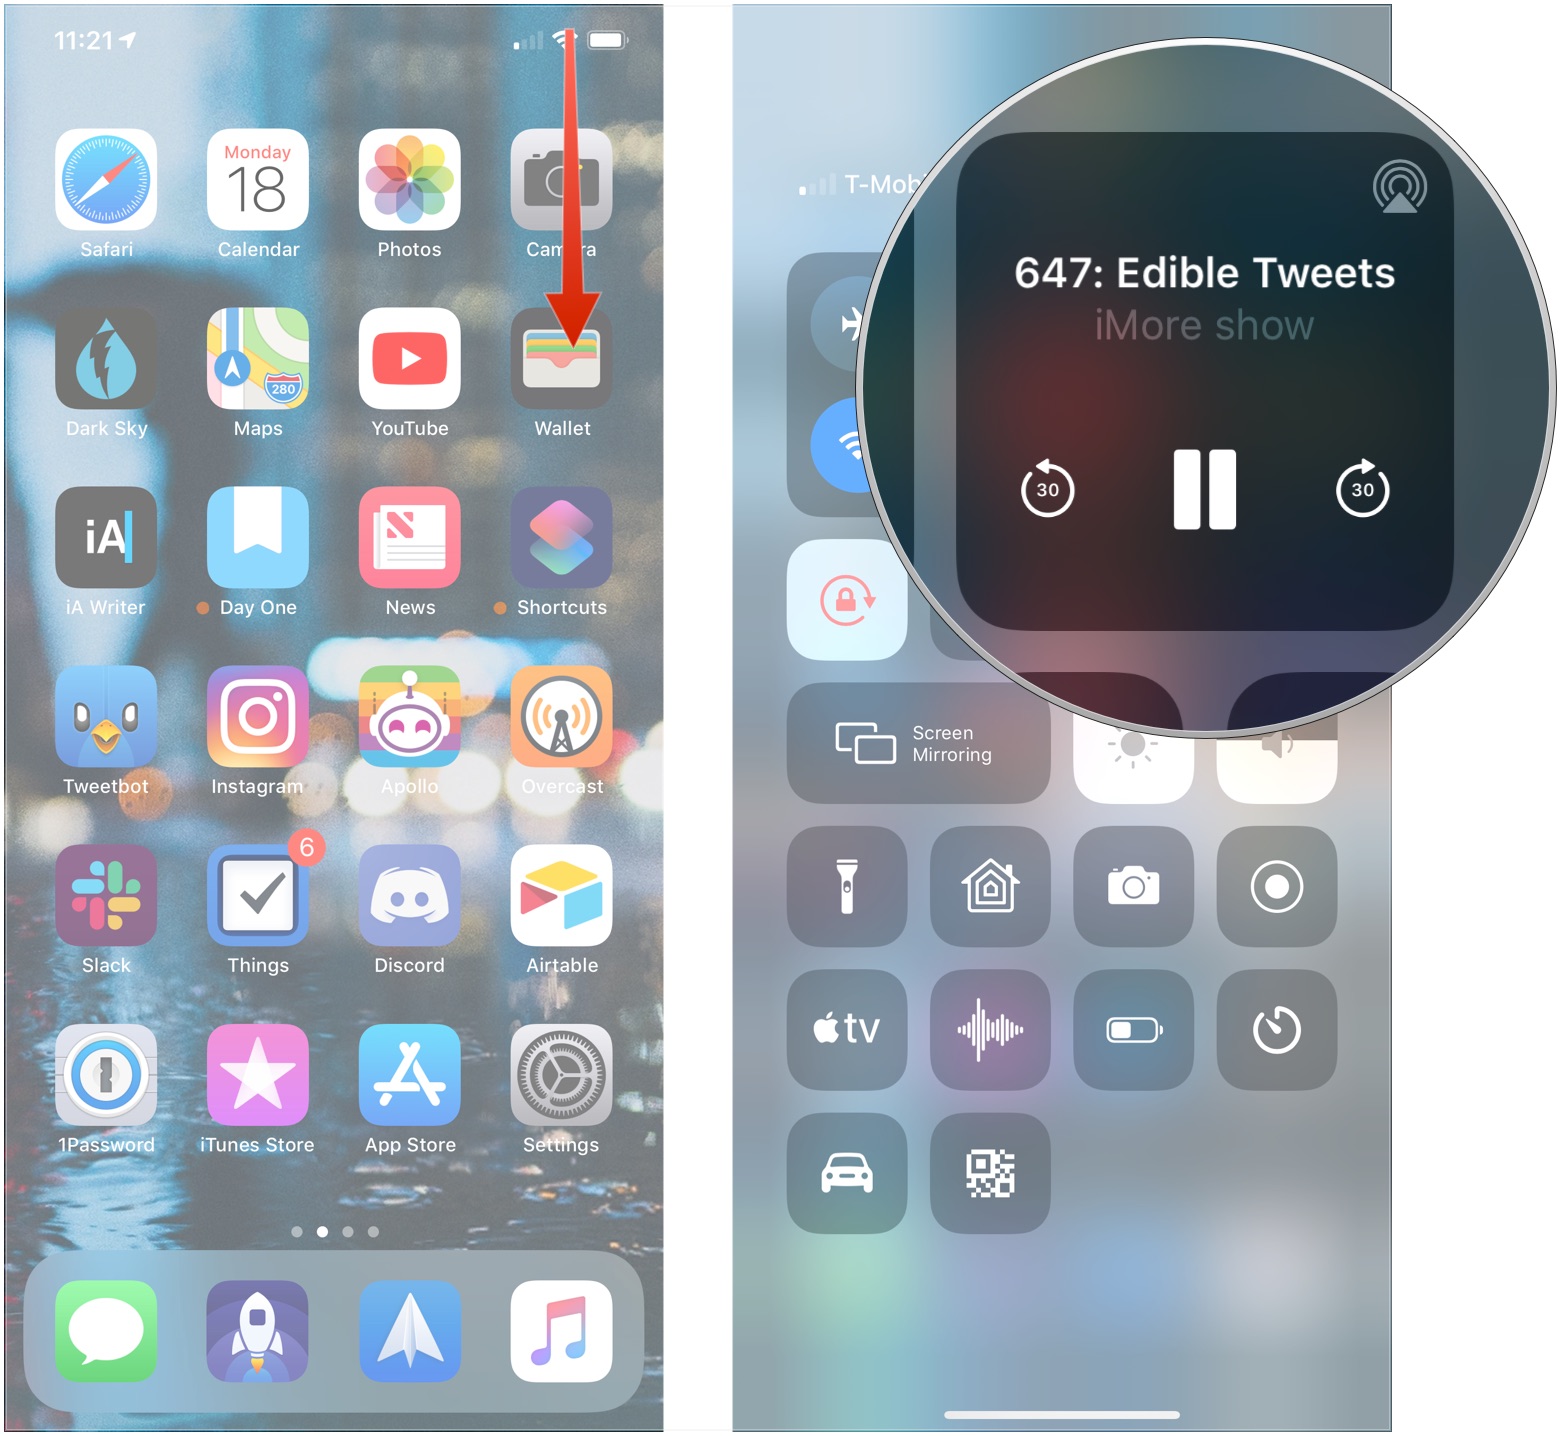 Open Control Center, press and hold or press firmly on audio widget